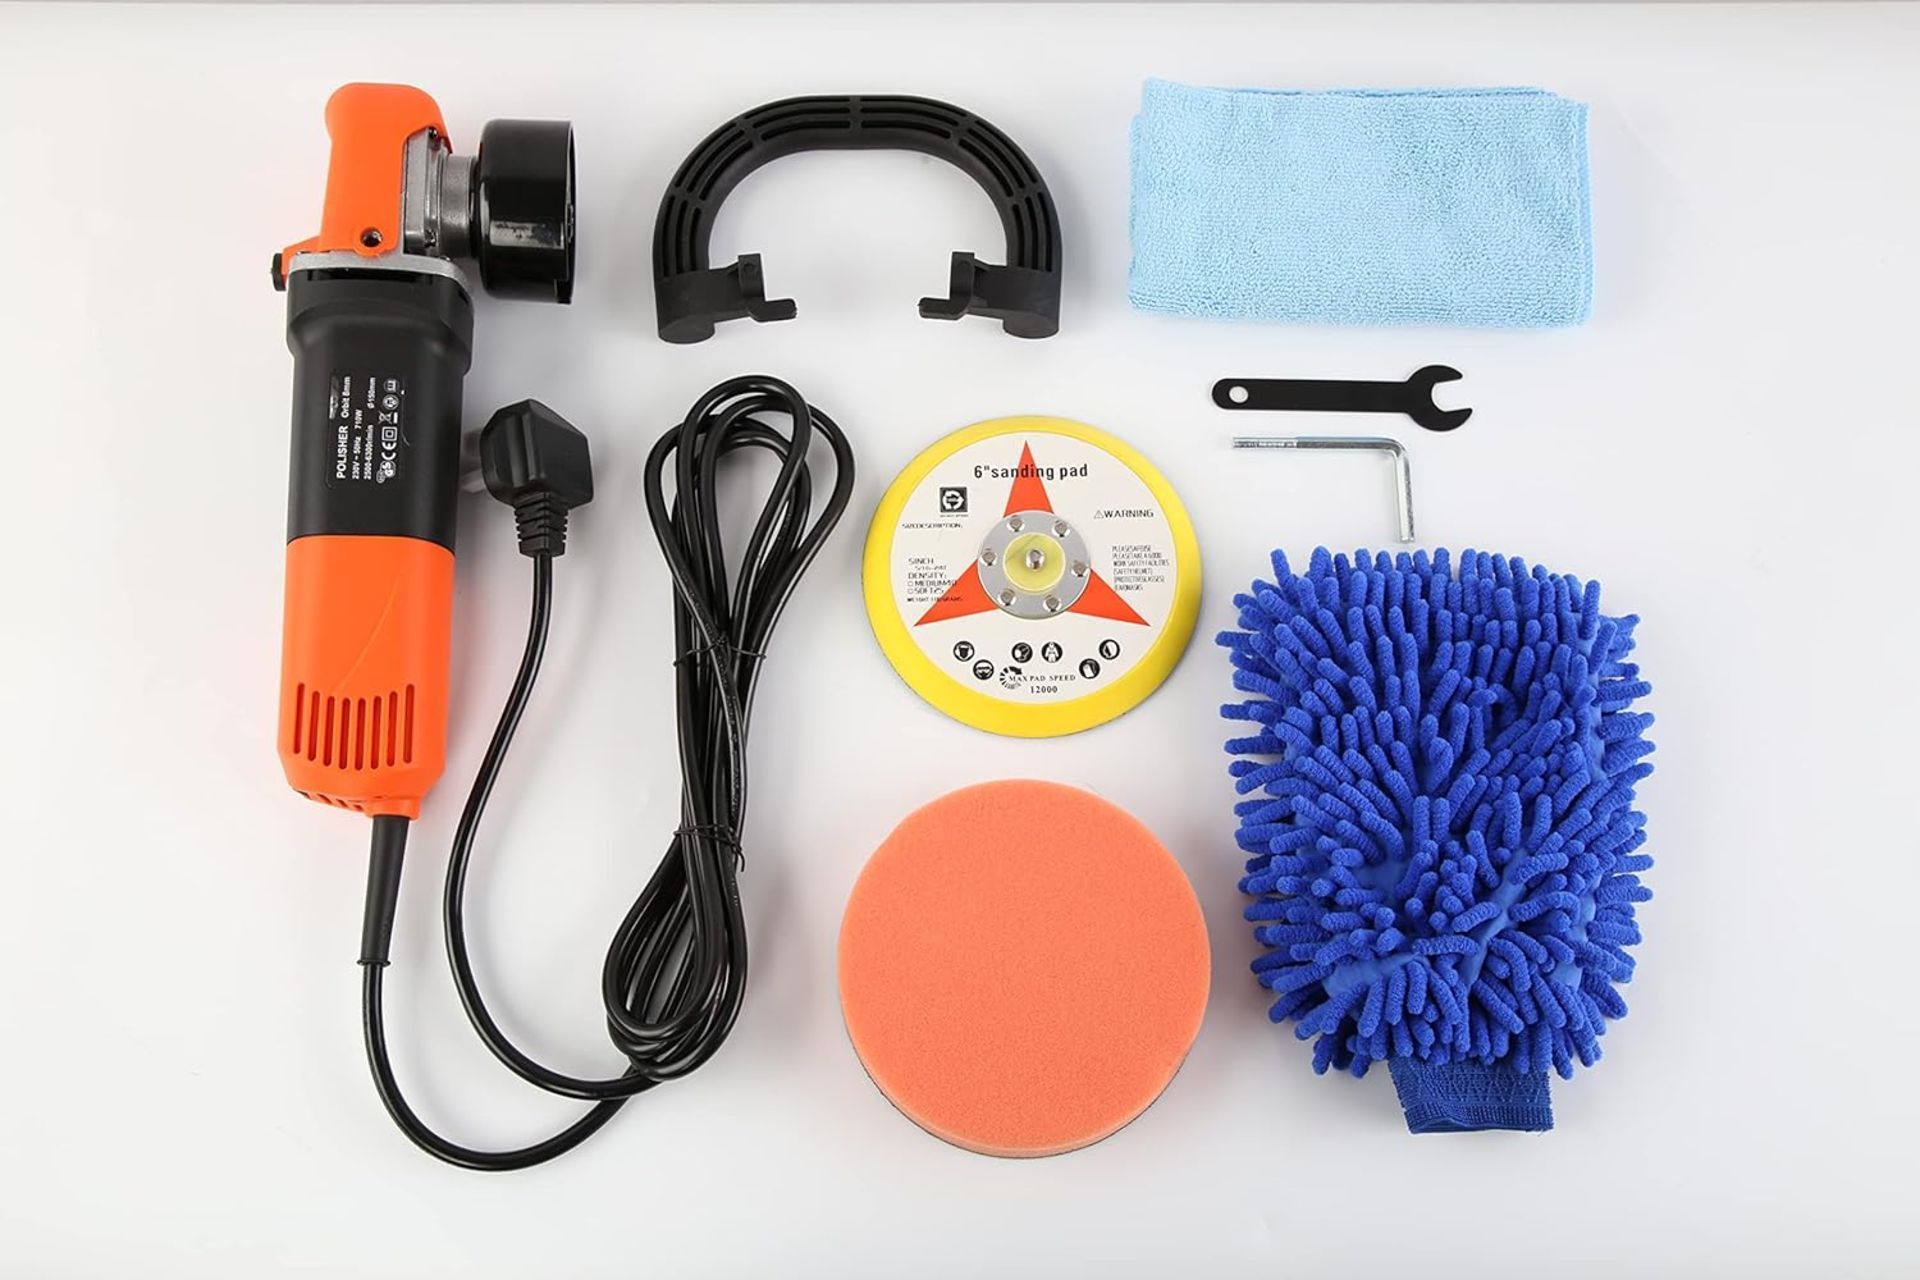 NEW & PACKAGED Powerstorm® Ultra Max Dual Action Car Polisher with 8mm Throw. CAPABLE AND SAFE ON - Image 2 of 4